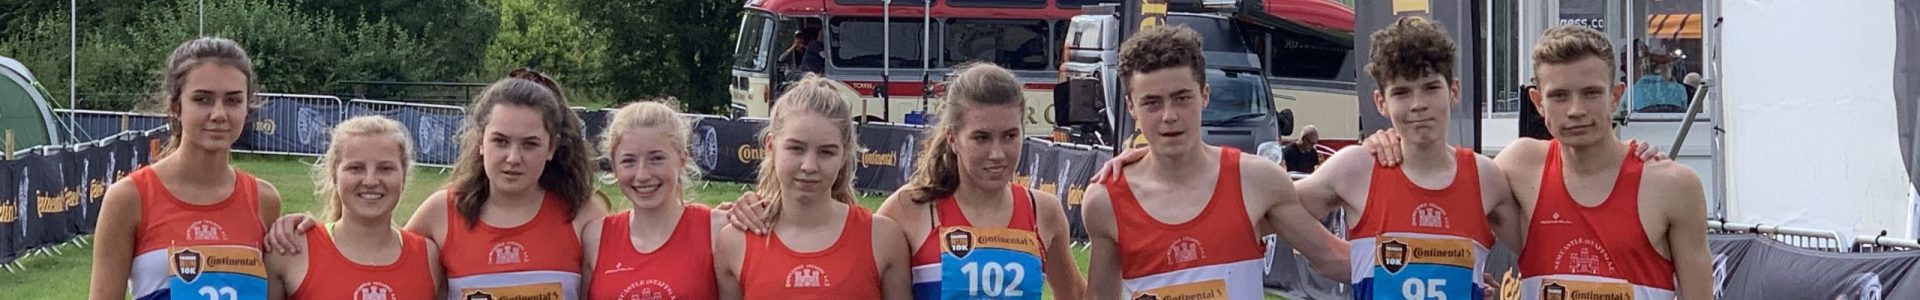 National Young Athletes Road Relays – 4/10/2105